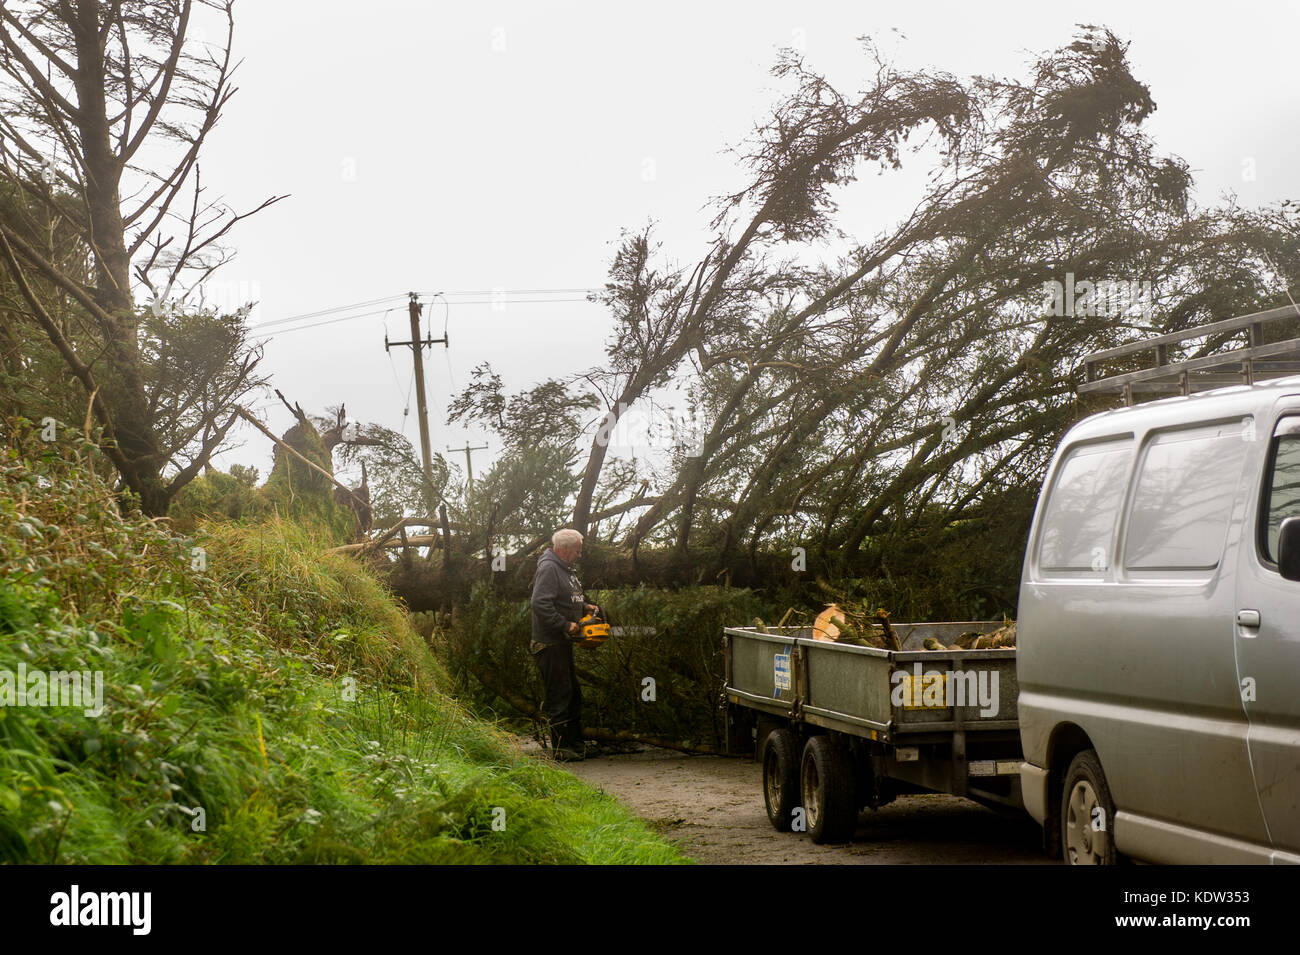 Schull, Ireland 16th Oct, 2017. Ex-Hurricane Ophelia caused widespread structural damage when she hit Ireland on Monday. Local volunteers clear a fallen tree near Schull. Credit: AG News/Alamy Live News. Stock Photo